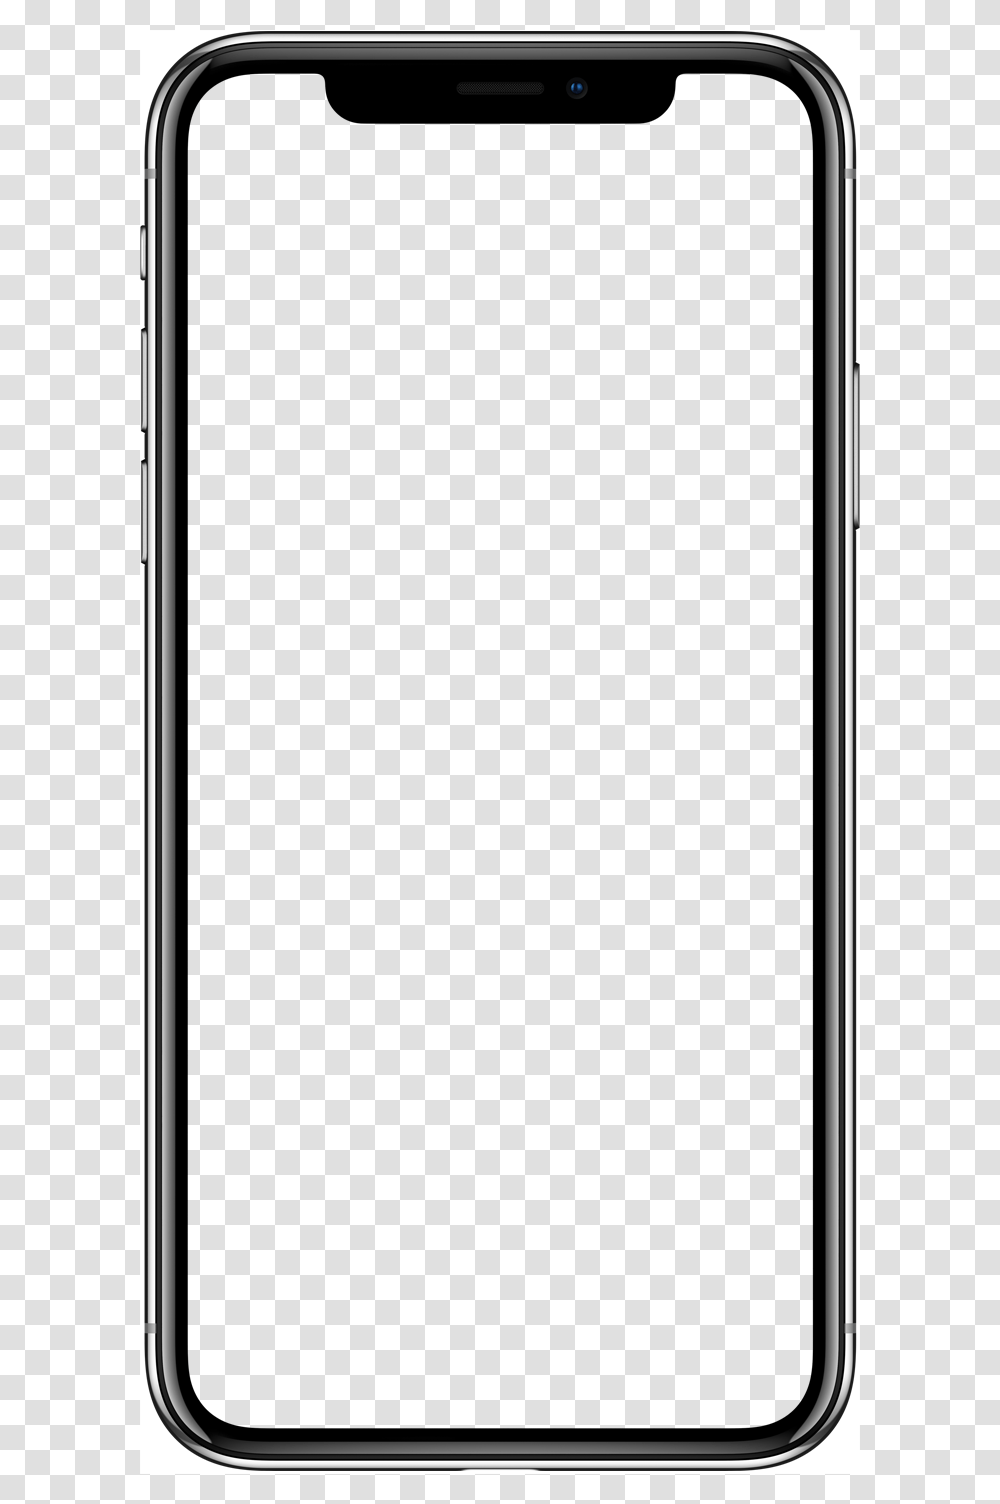 Apple Iphone X Landing, Mobile Phone, Electronics, Cell Phone Transparent Png